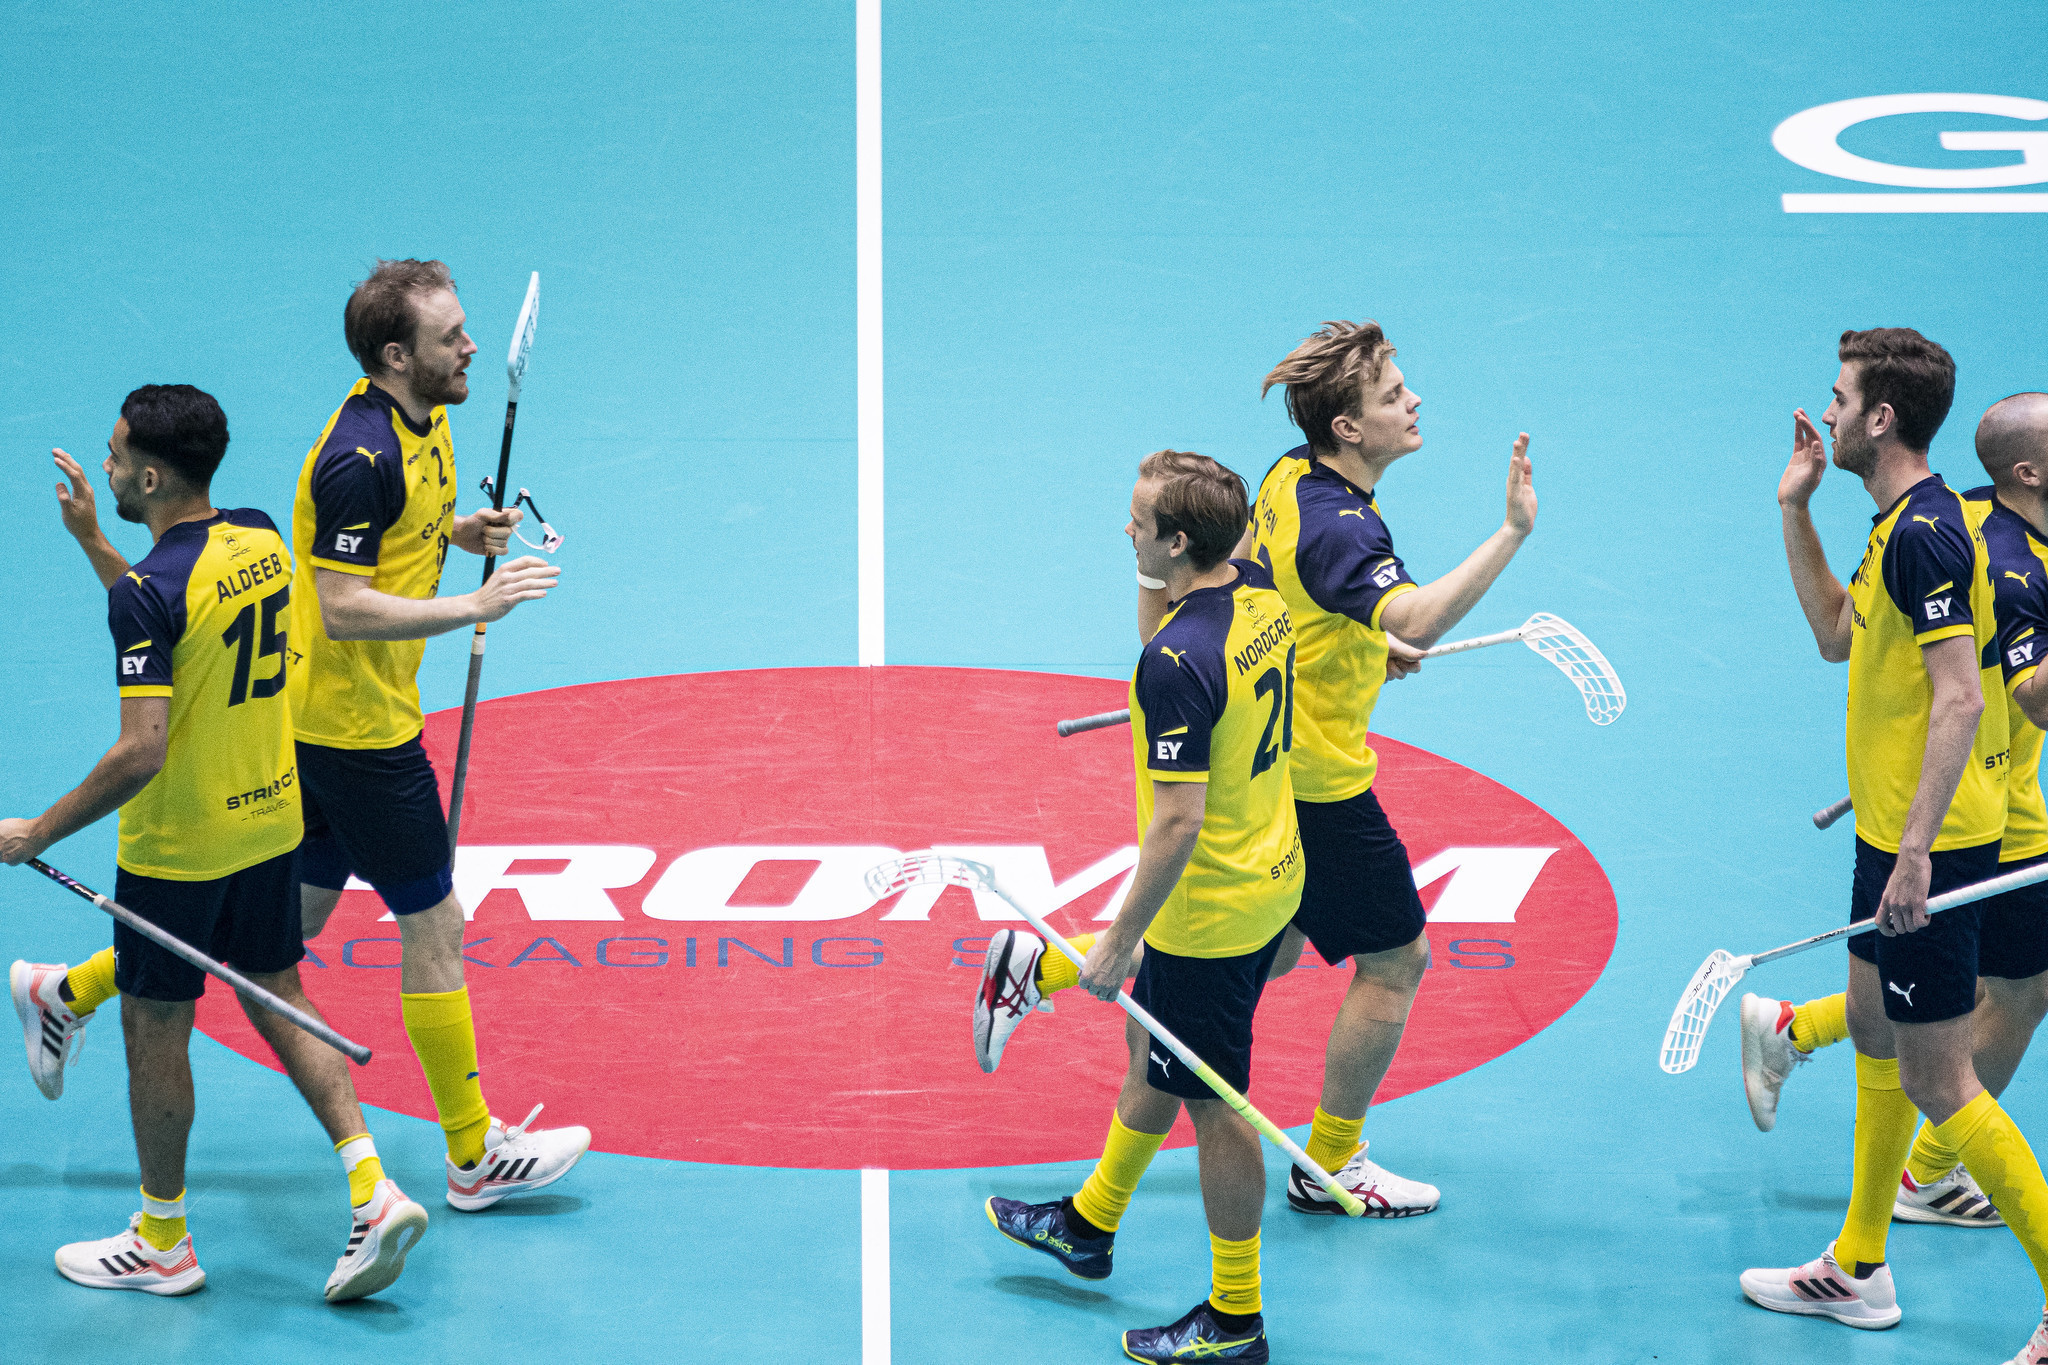 Sweden triumphed at the 2020 Men's World Floorball Championship, which was delayed until December 2021 ©IFF/Juha Leskinen